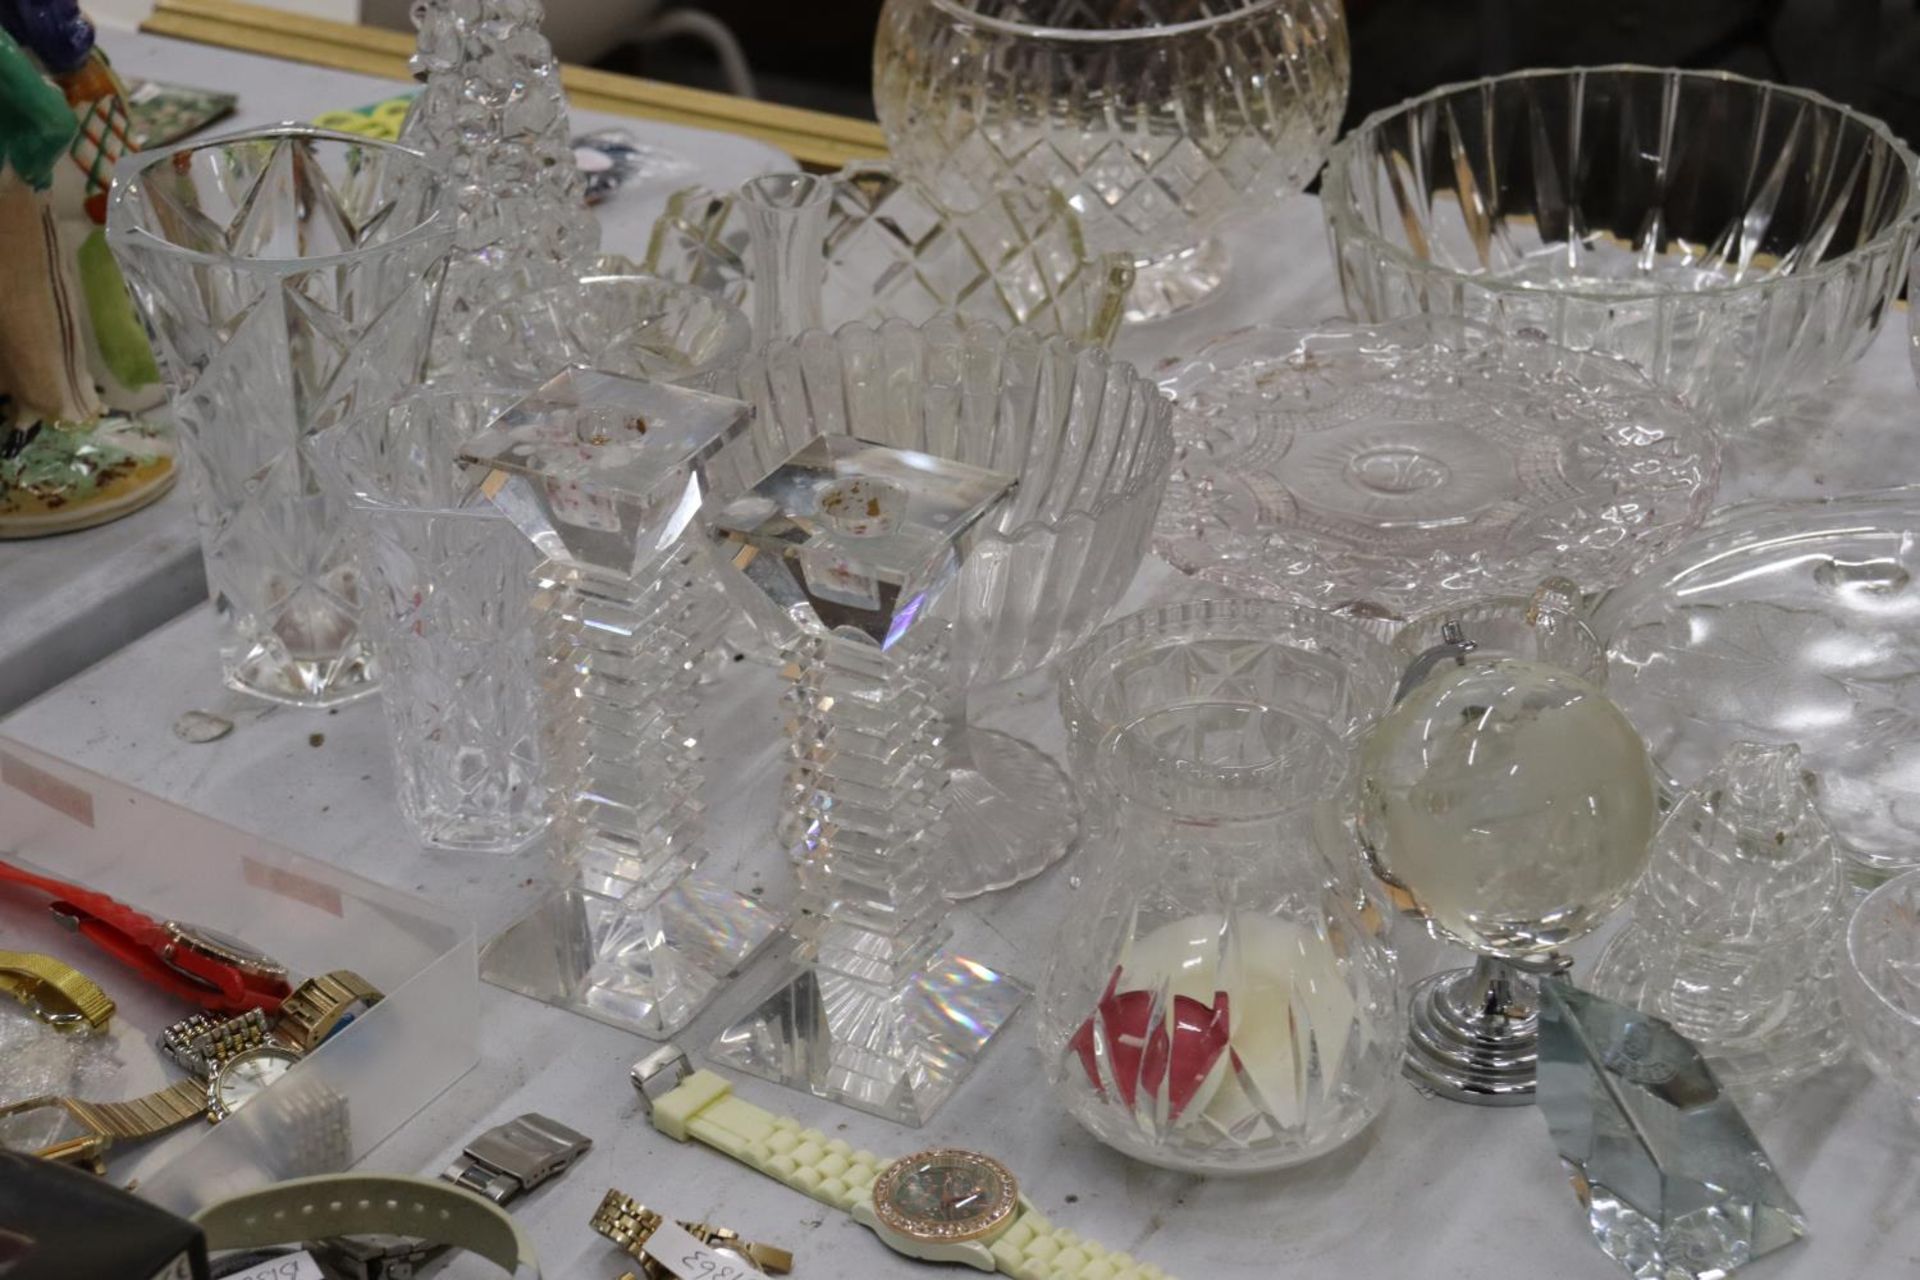 A LARGE QUANTITY OF GLASSWARE TO INCLUDE LARGE BOWLS, VASES, CANDLESTICKS, A GLOBE, ETC - Image 4 of 6